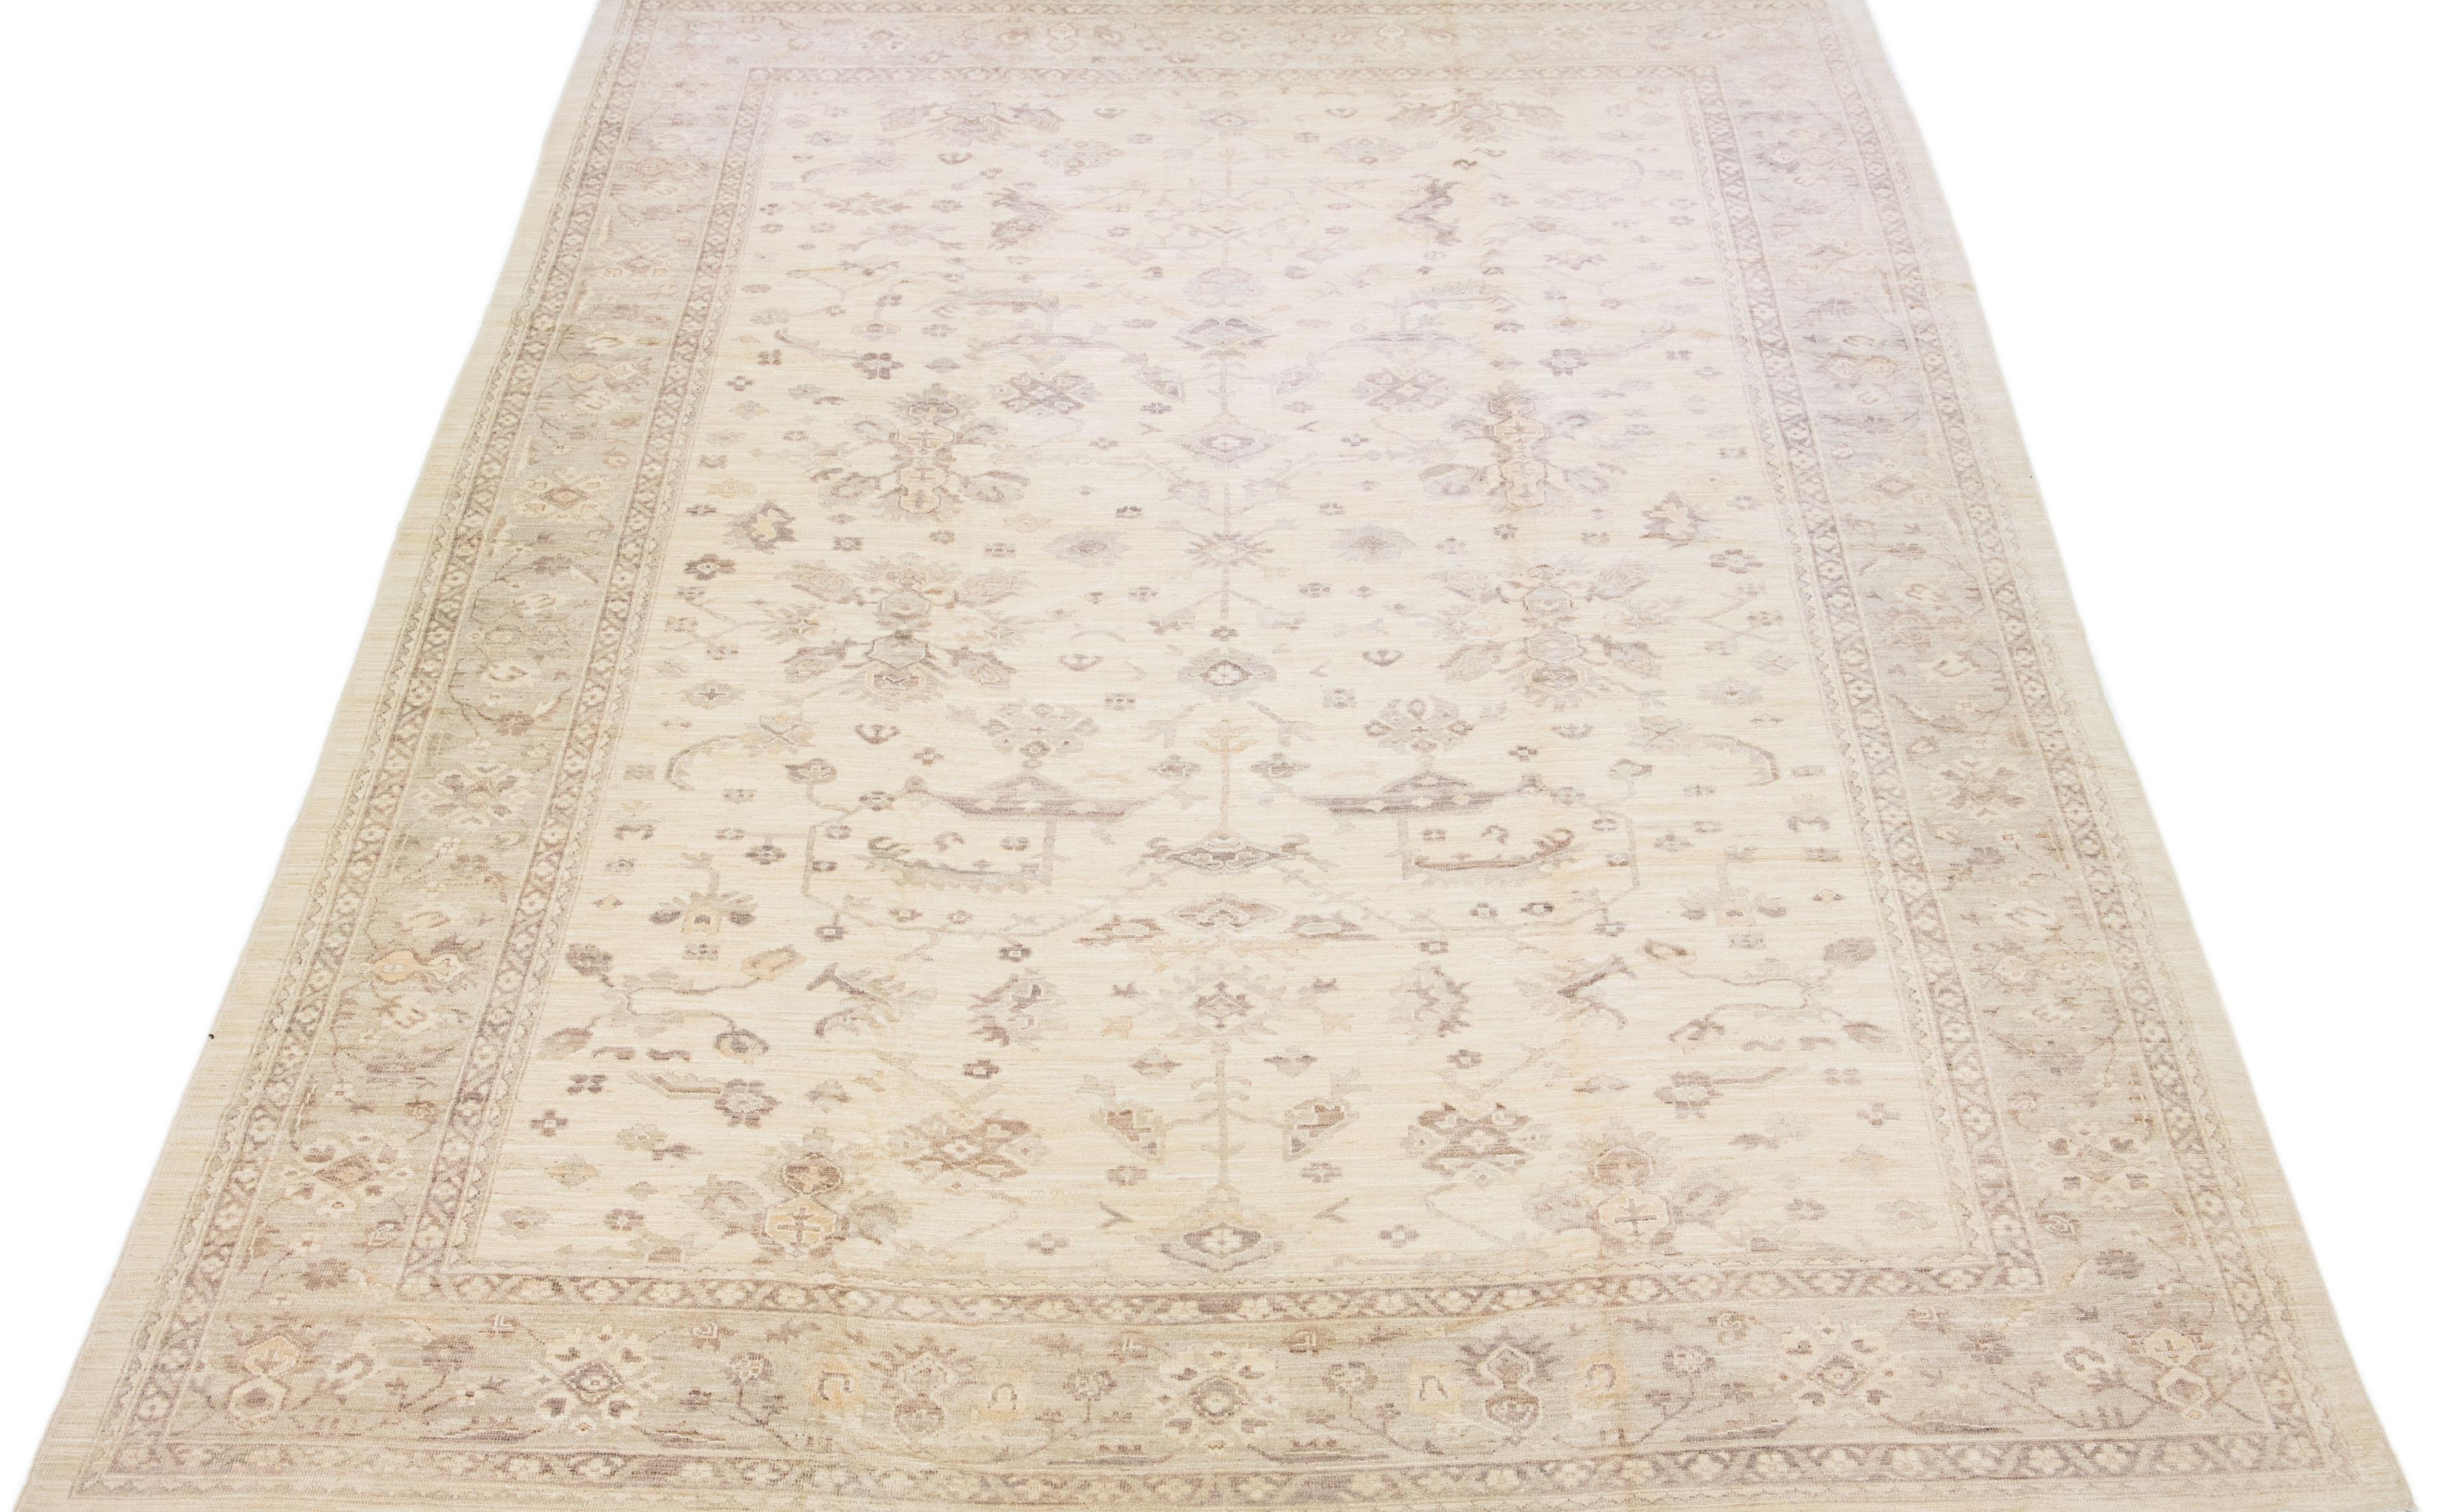 Beautiful modern Oushak hand-knotted wool rug with a beige color field. This Turkish Piece has gray accent colors in a gorgeous all-over floral design.

This rug measures: 11'7